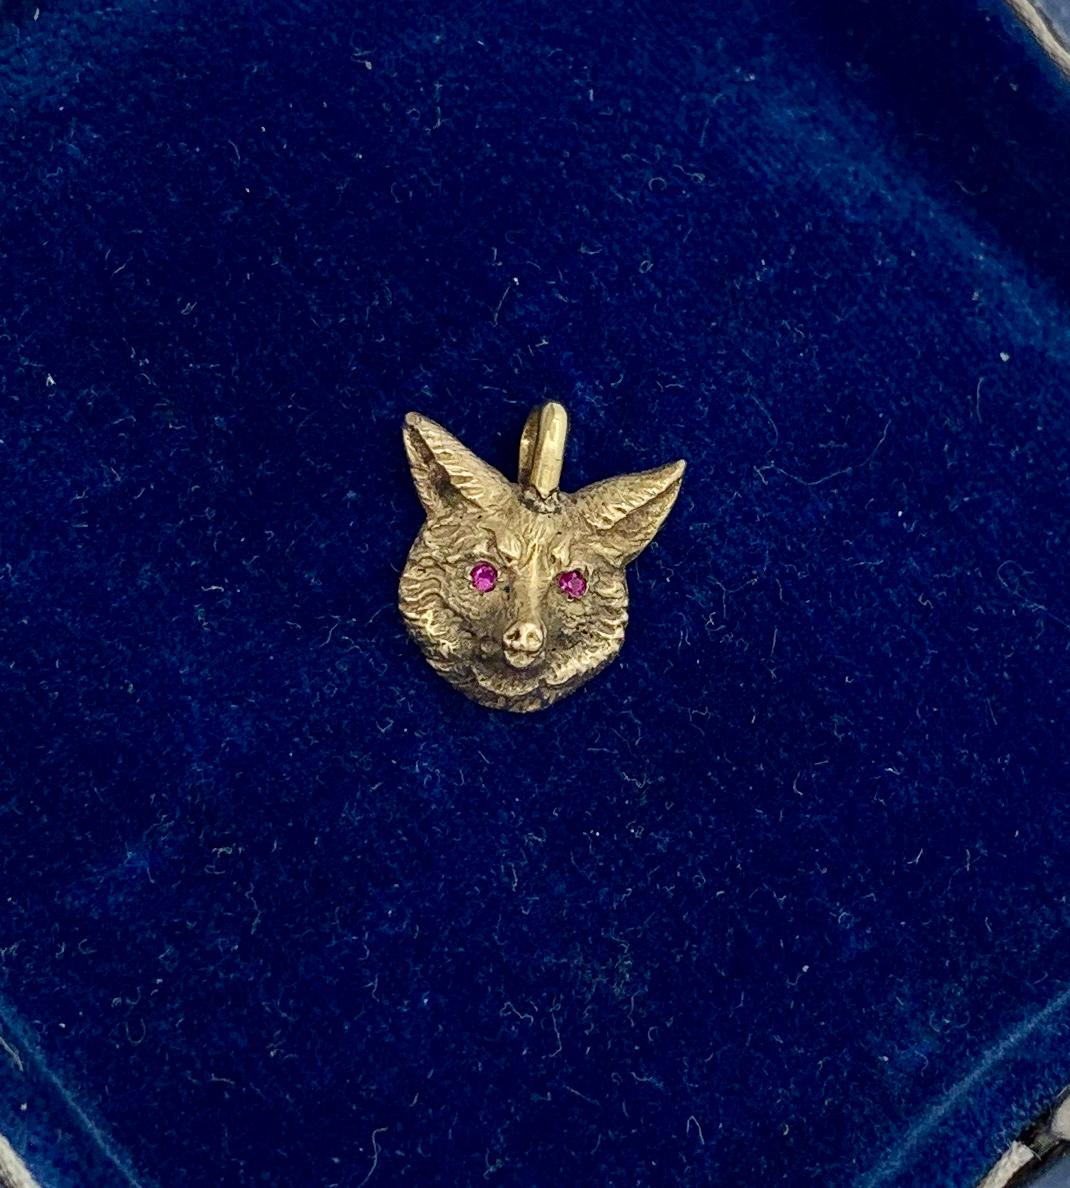 A wonderful antique Belle Epoque, Victorian pendant with a beautifully modeled Fox head in 14 Karat Gold with two round faceted Ruby eyes.  We love our antique animal jewelry and this one has such stunning design.   The engraved gold work creates a